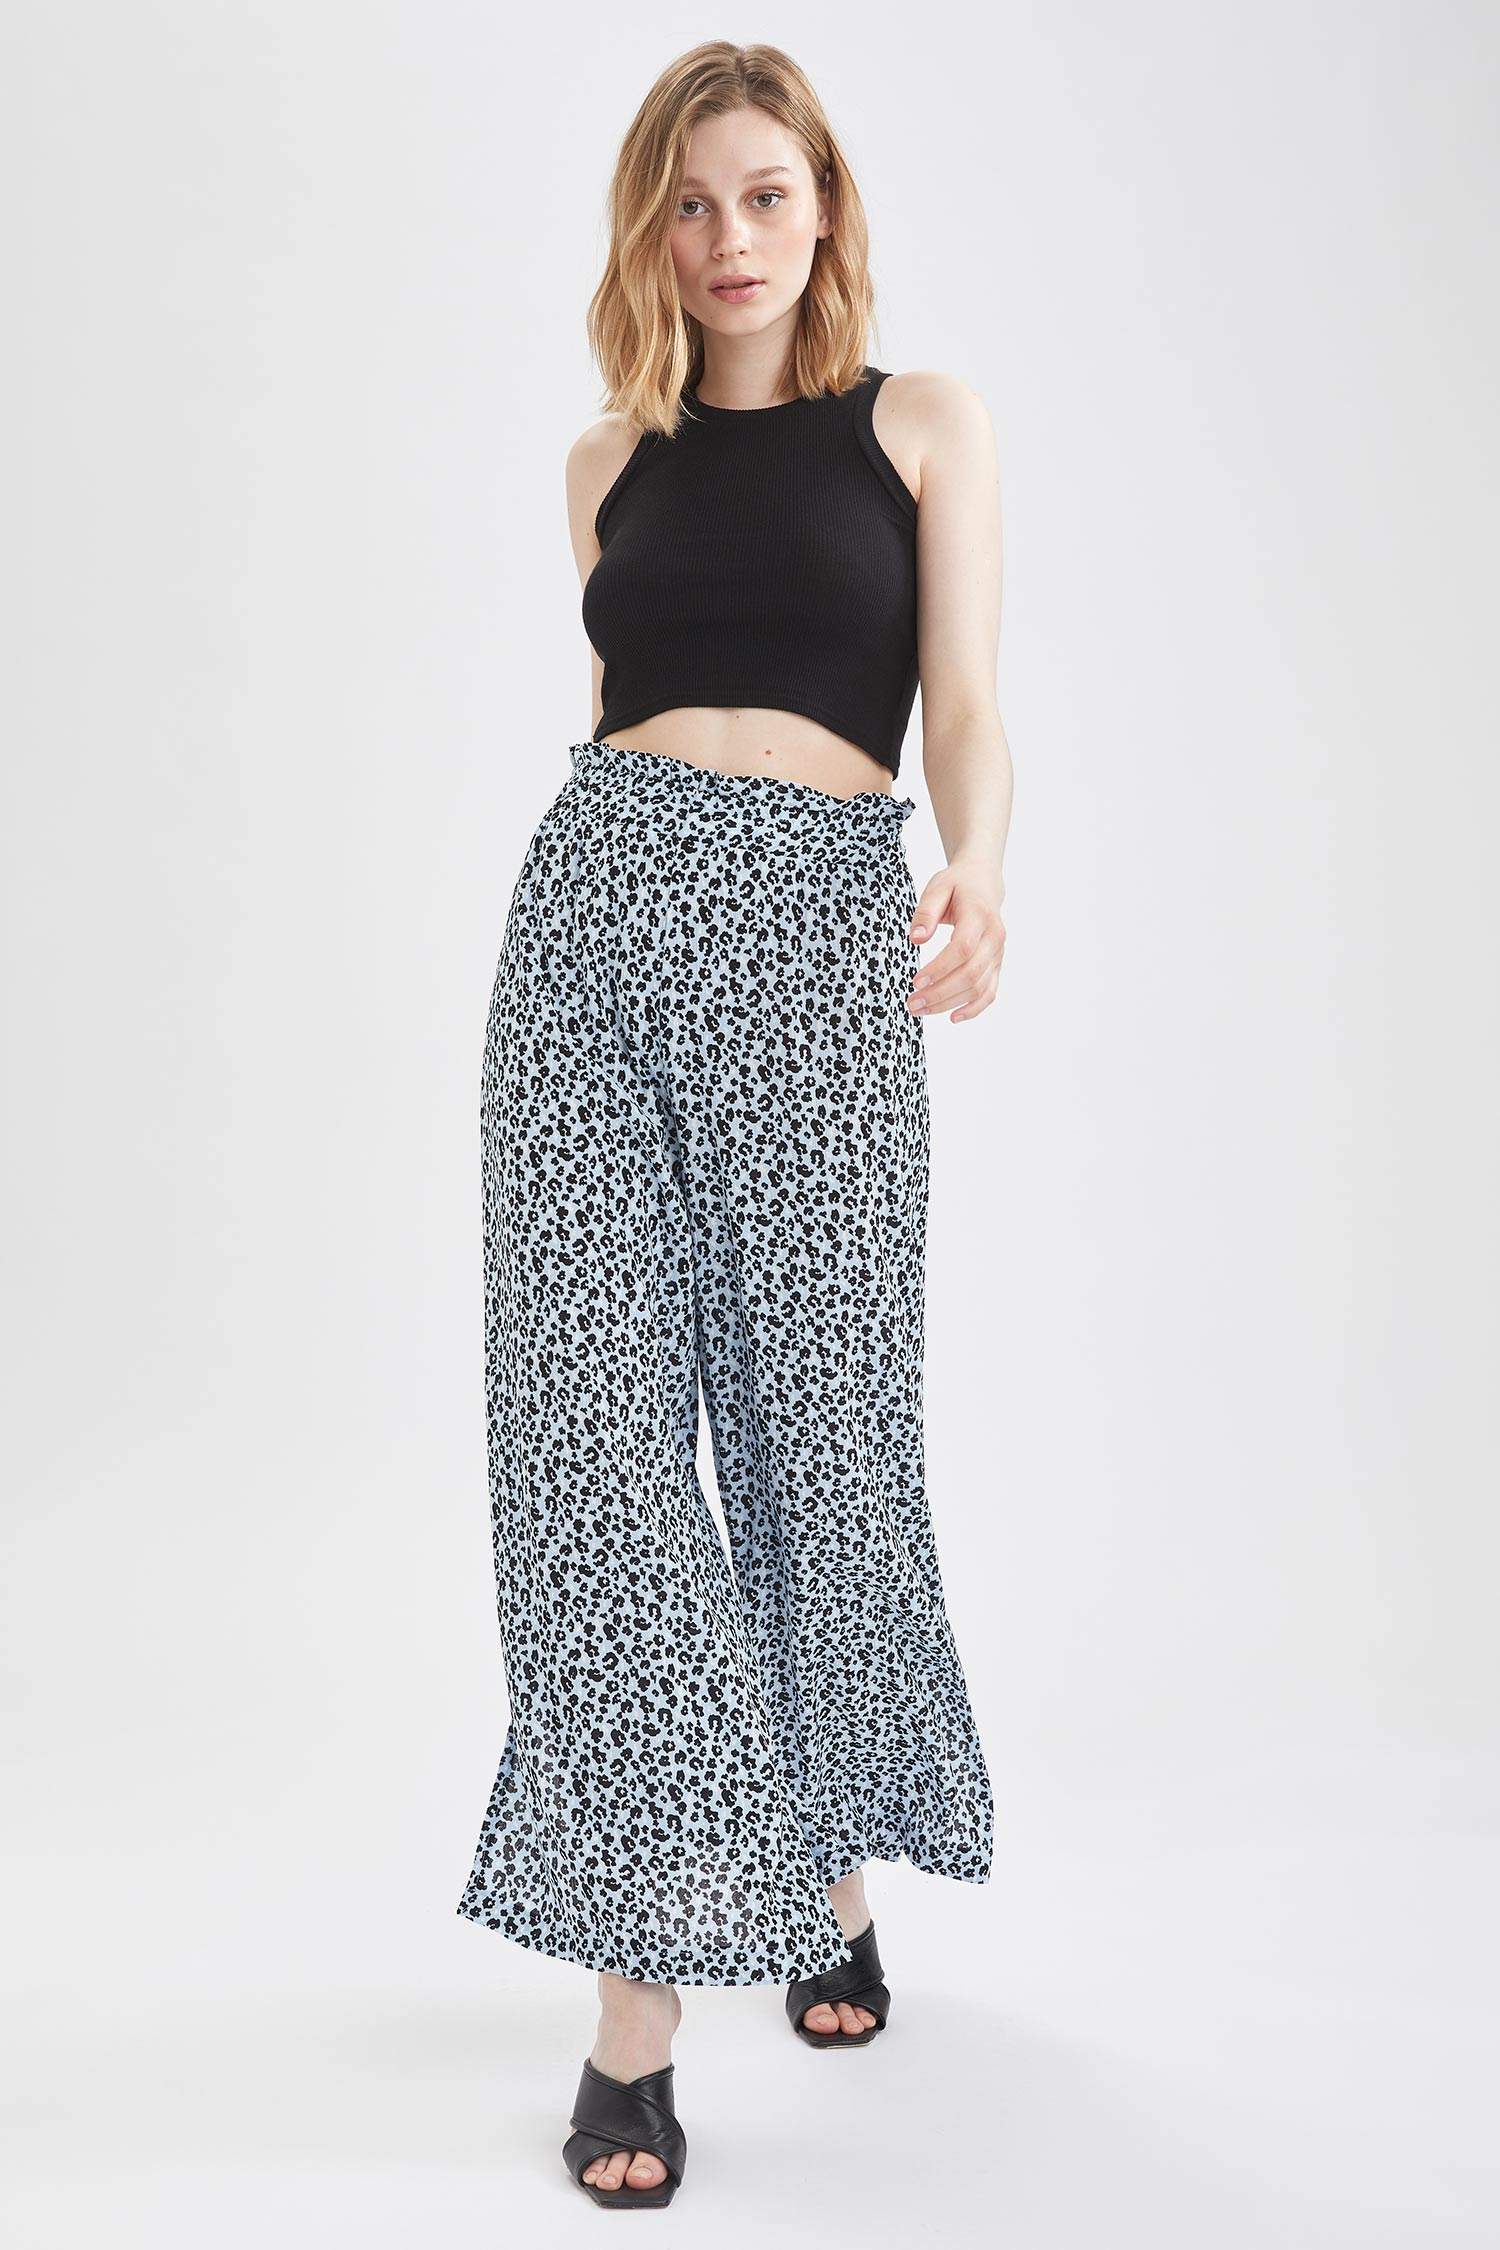 Blue WOMAN Patterned High Waisted Palazzo Trousers 2045447 | DeFacto